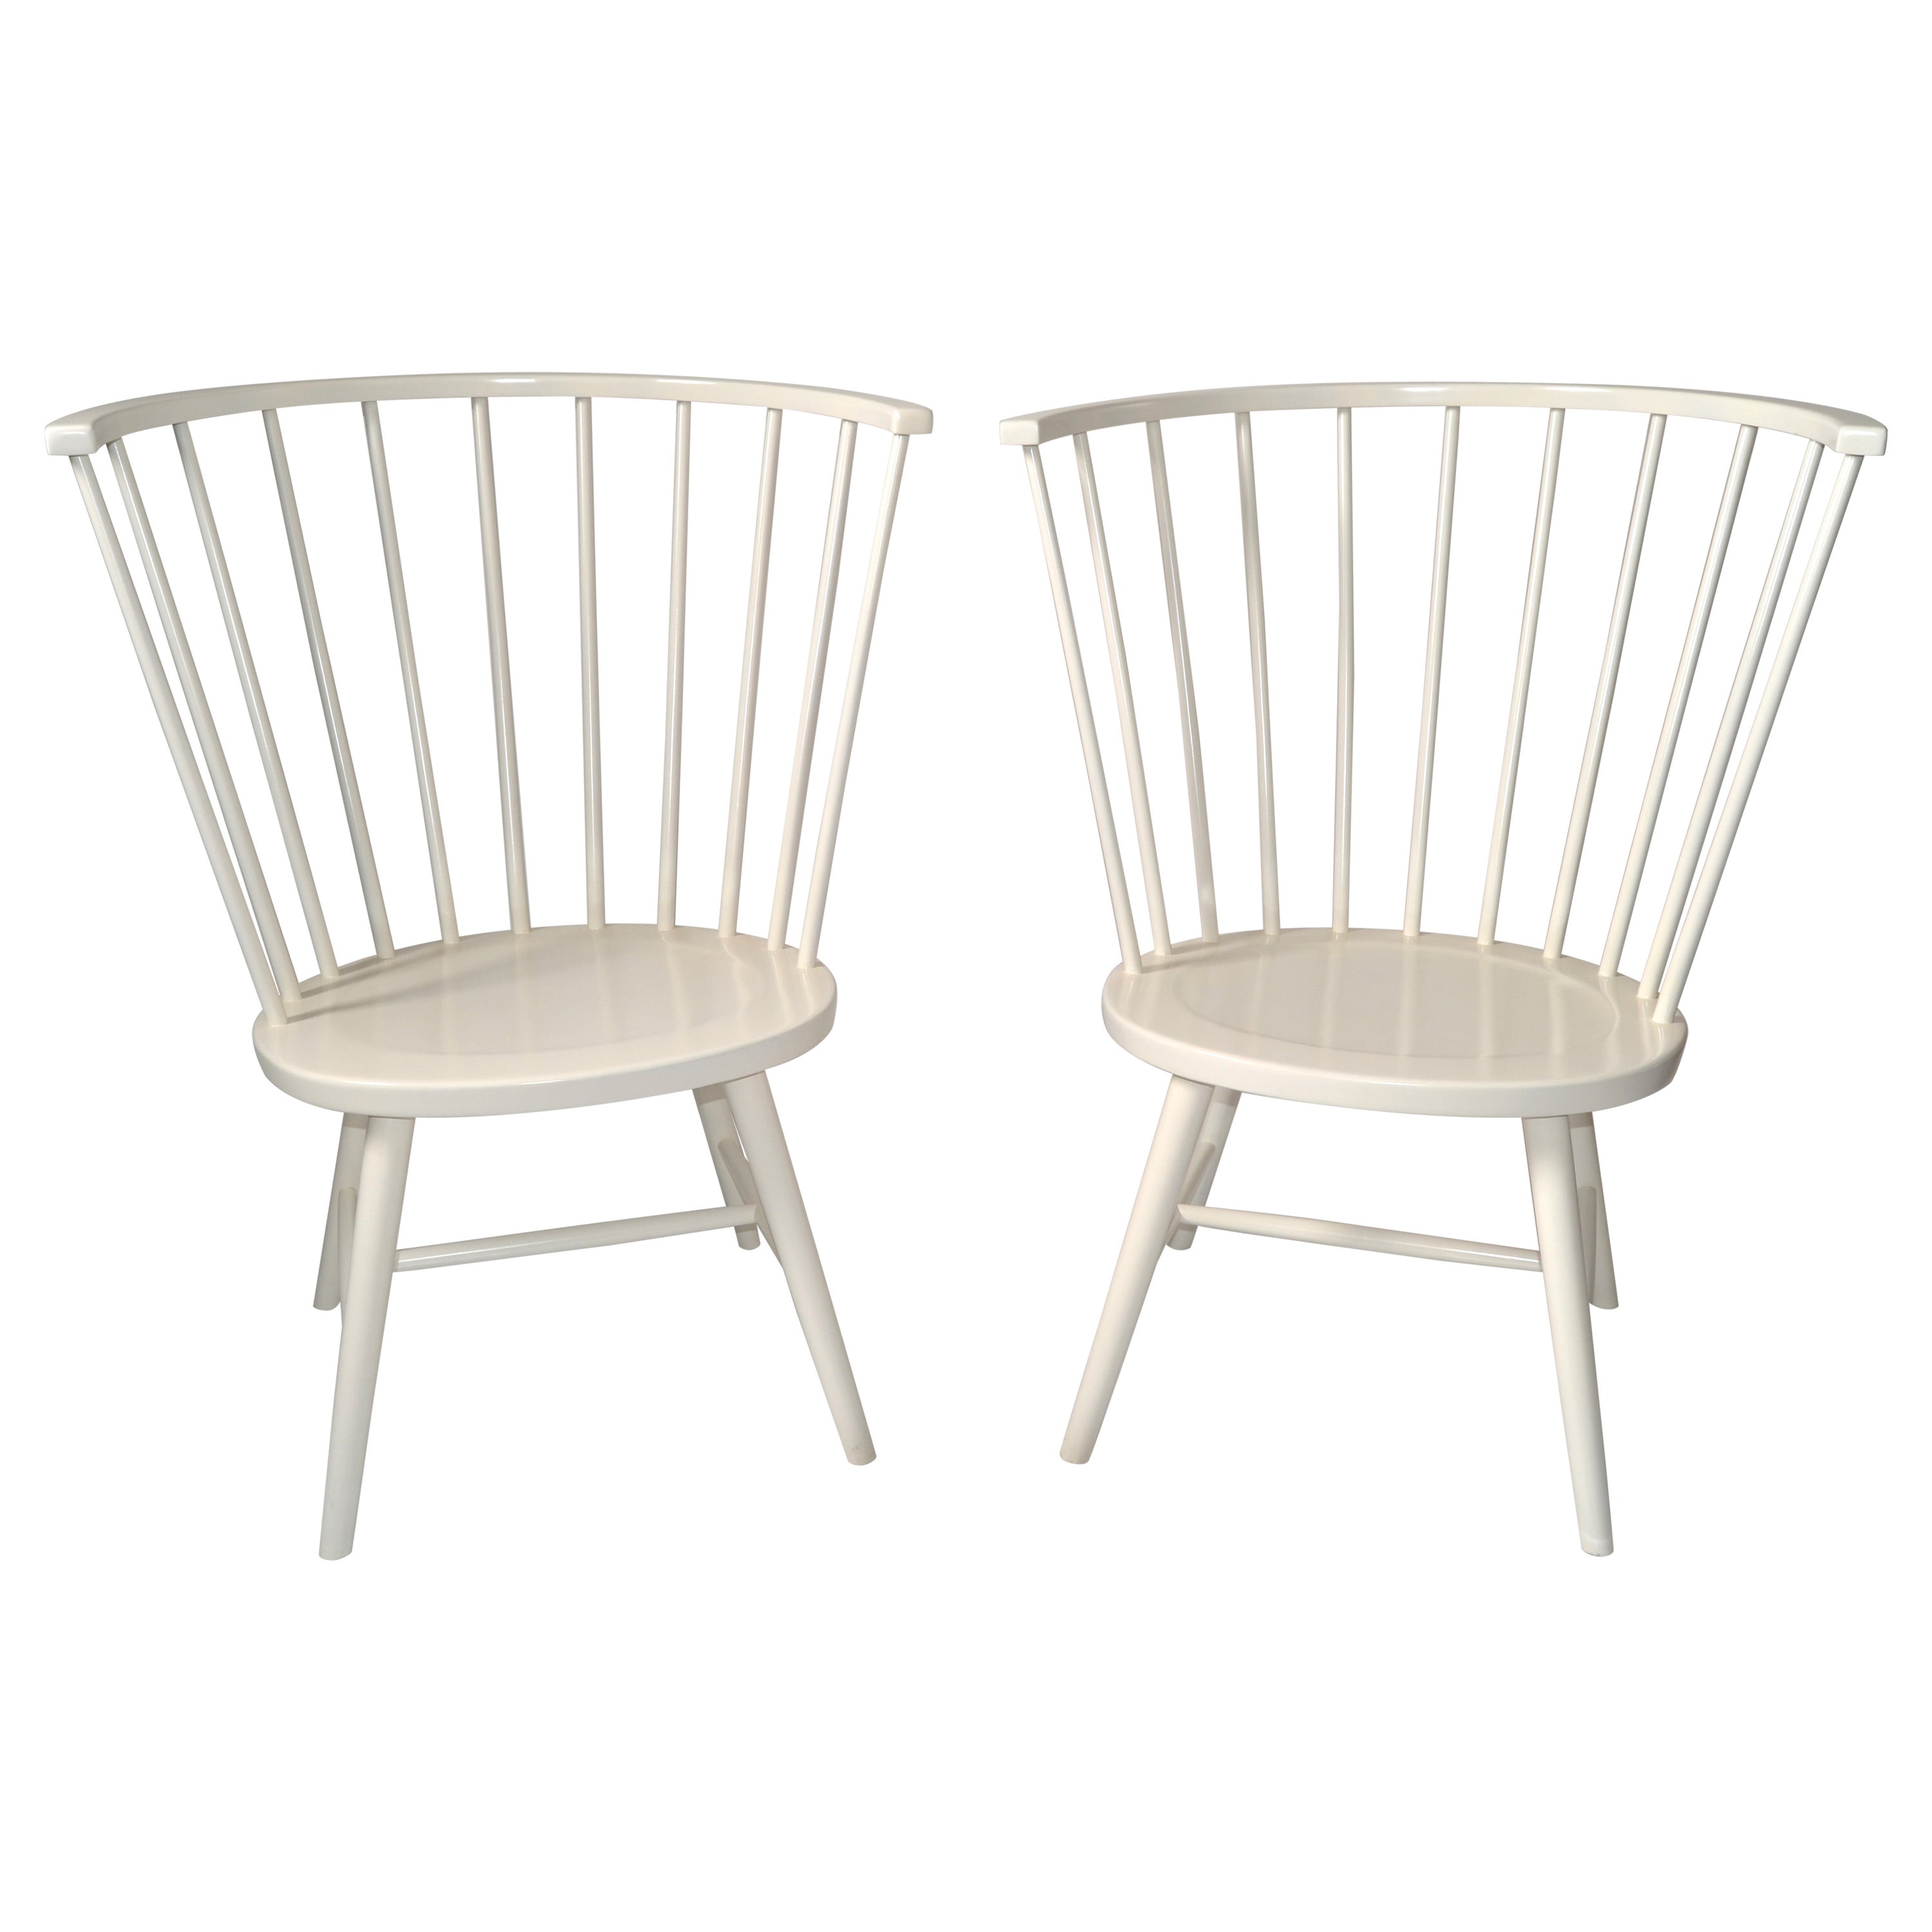 Pair, Riviera Windsor High Backed White Chairs By Paola Navone Rustic American  